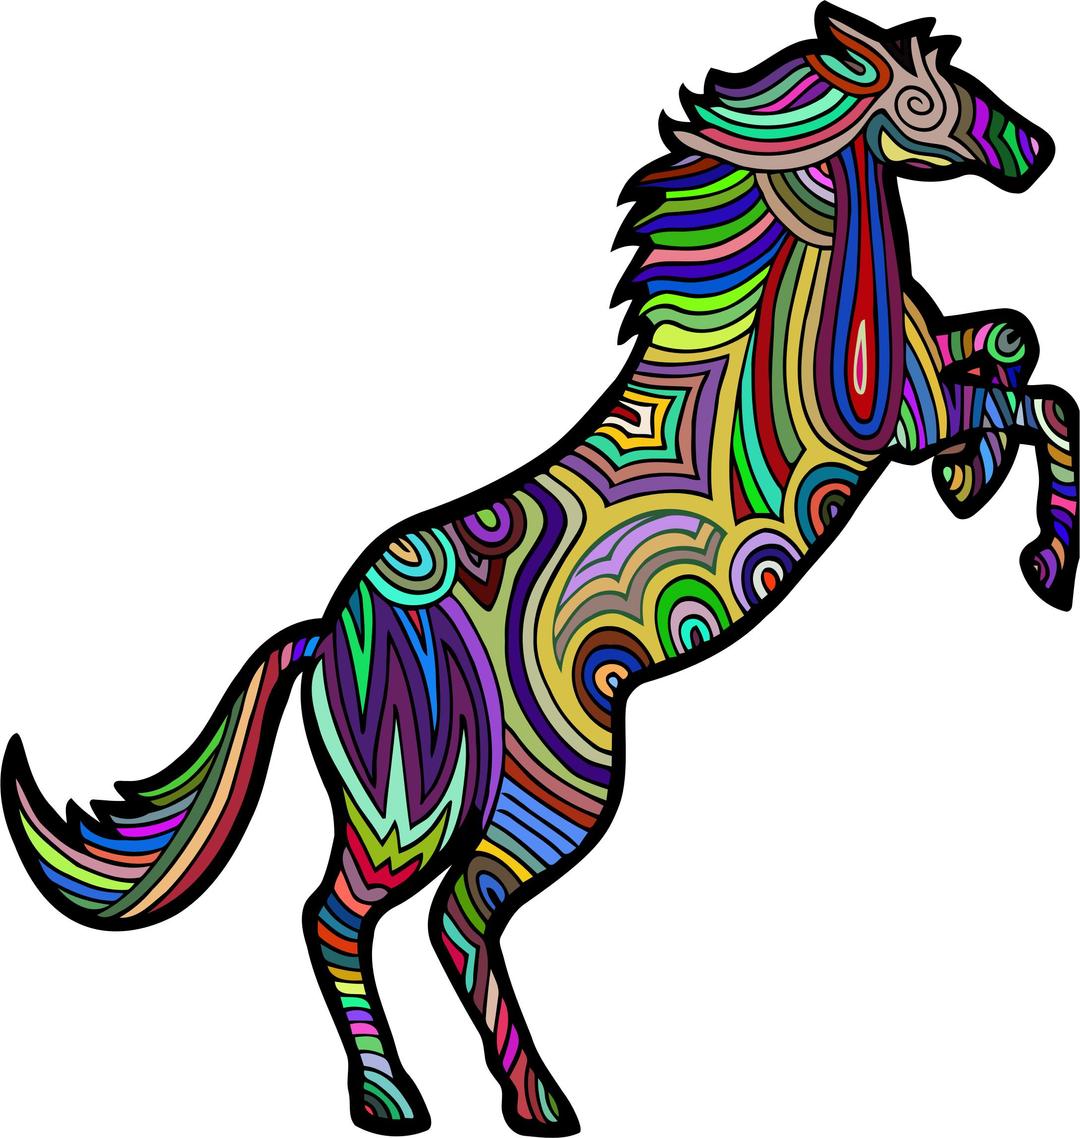 Chromatic Stylized Horse 3 png transparent